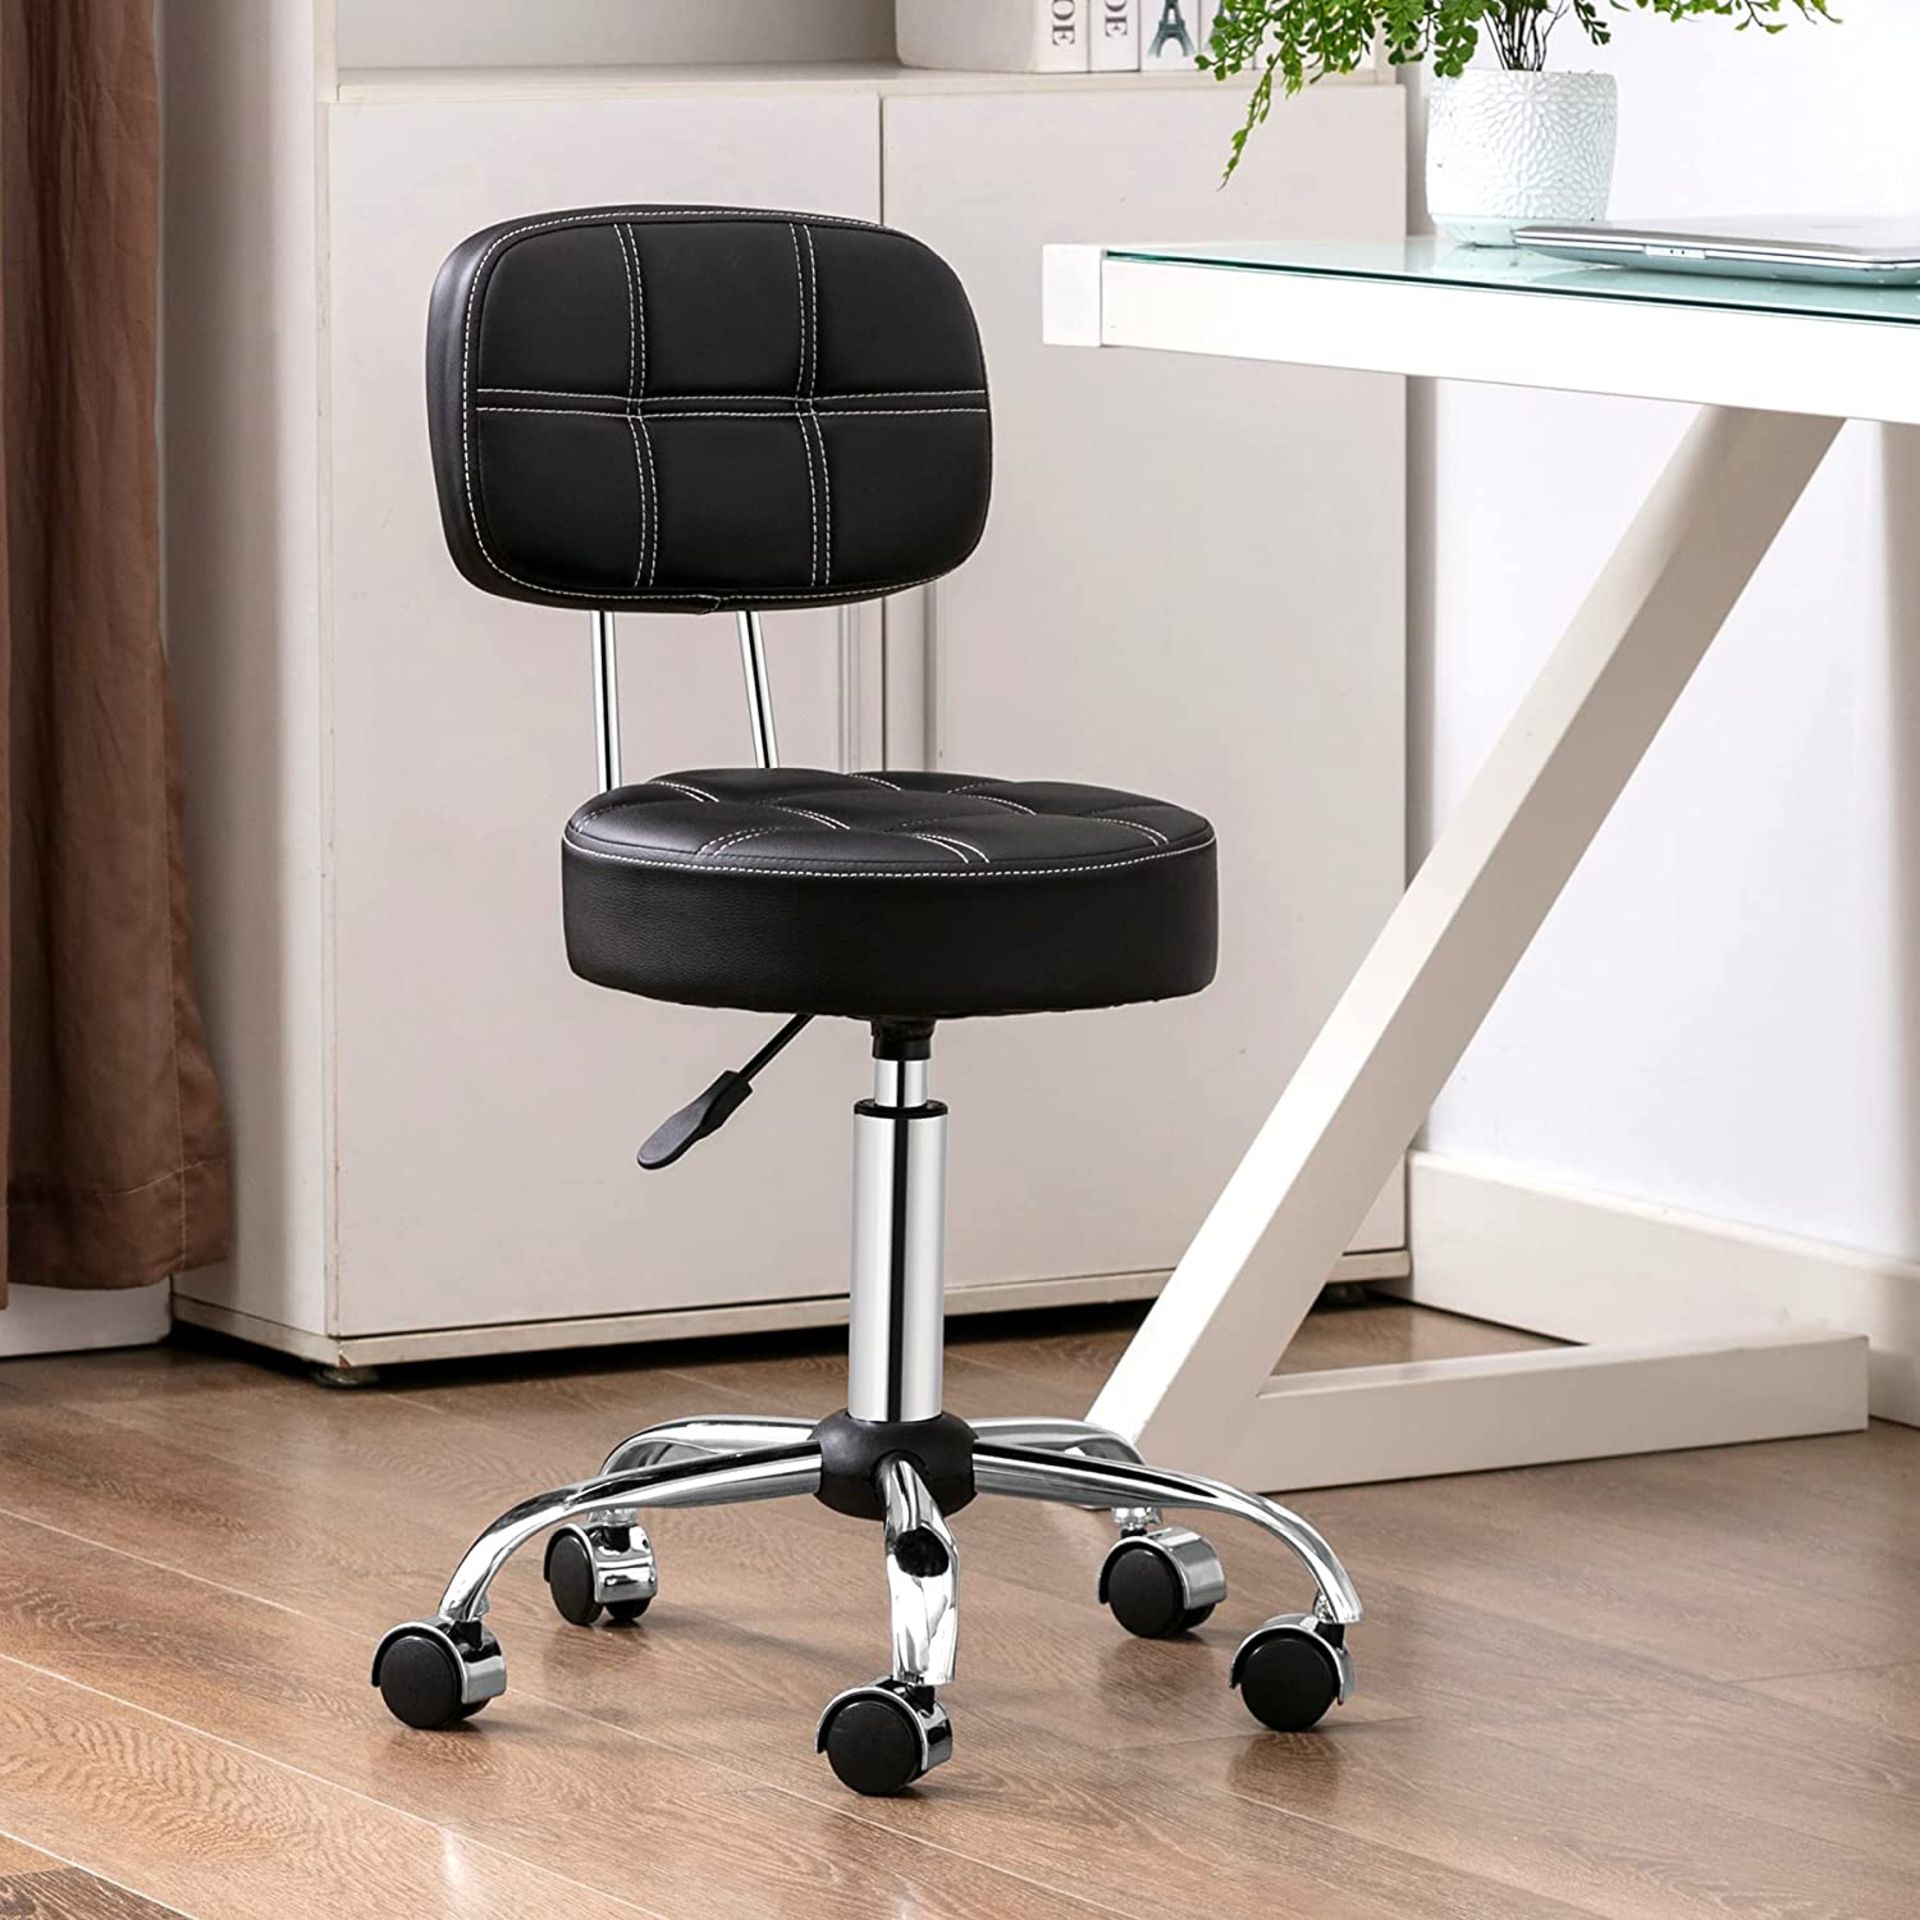 PALLET TO CONTAIN 6x NEW Rolling stool with High Backrest and Adjustable Footrest,Pu Leather Massage - Image 4 of 5